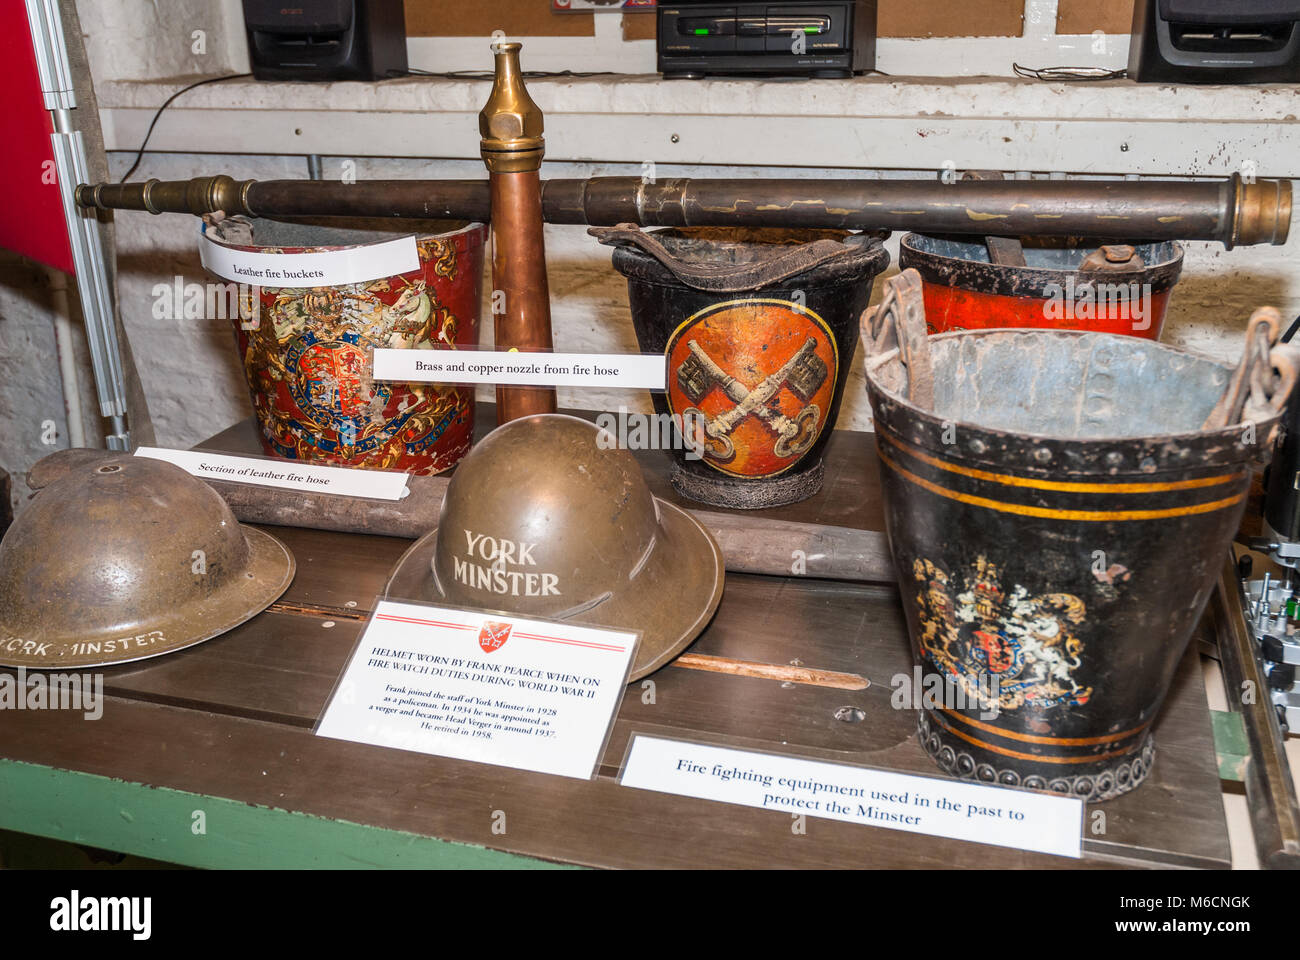 Fire fighting equipment, including leather buckets, used to protect York Minster in the past. Stock Photo